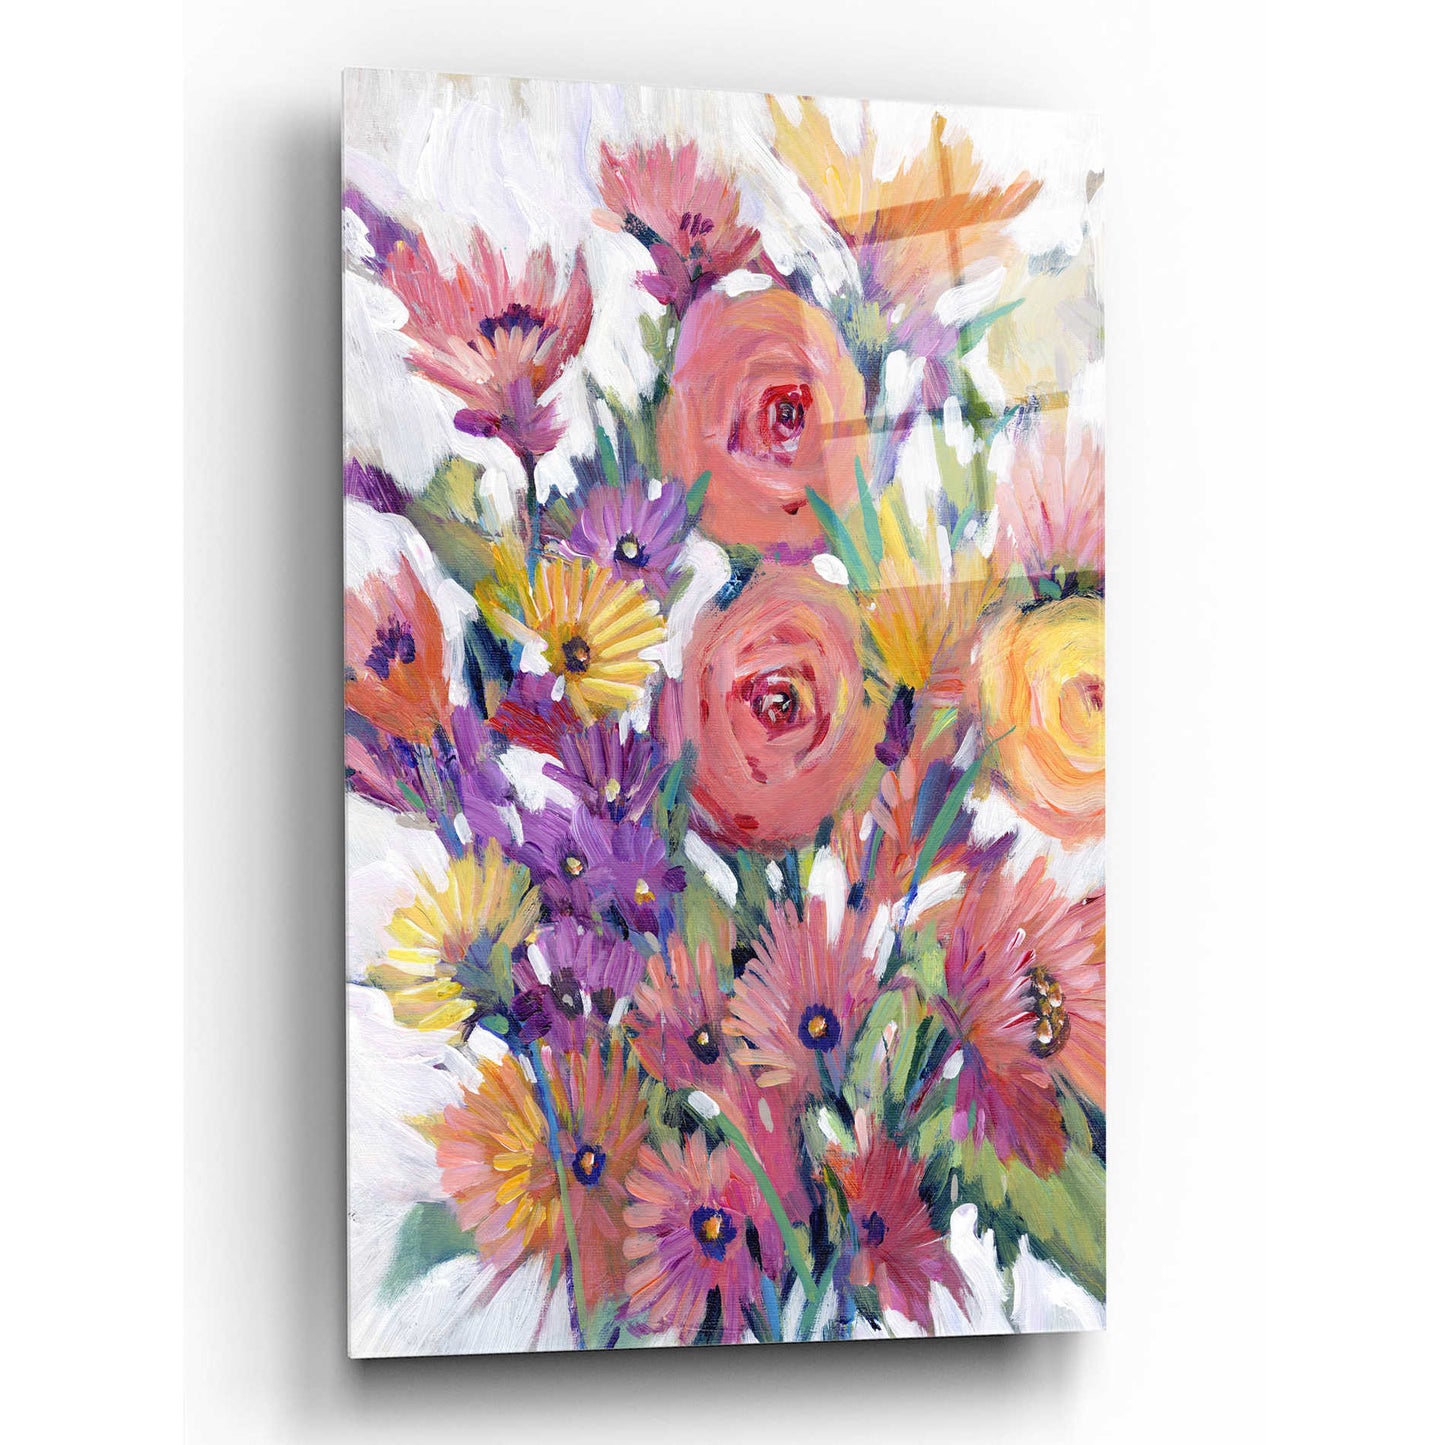 Epic Art 'Spring in Bloom I' by Tim O'Toole, Acrylic Glass Wall Art,12x16